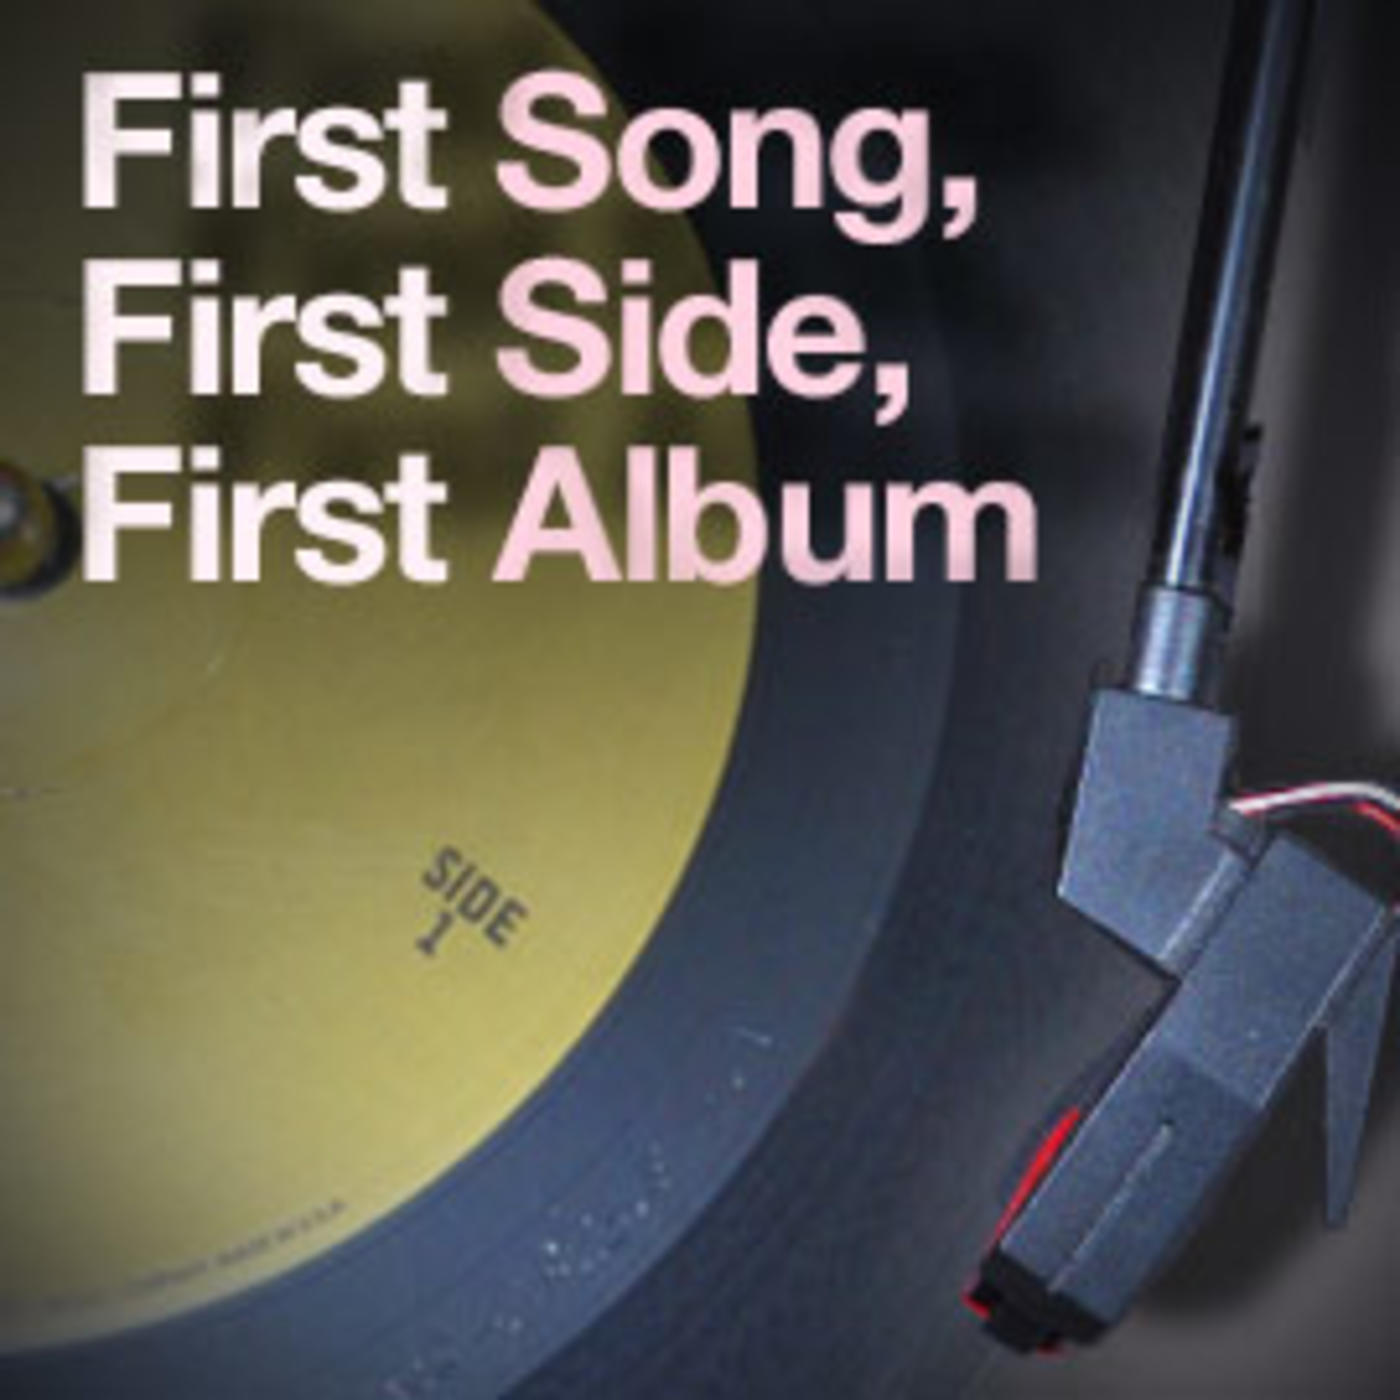 First Song, First Side, First Album